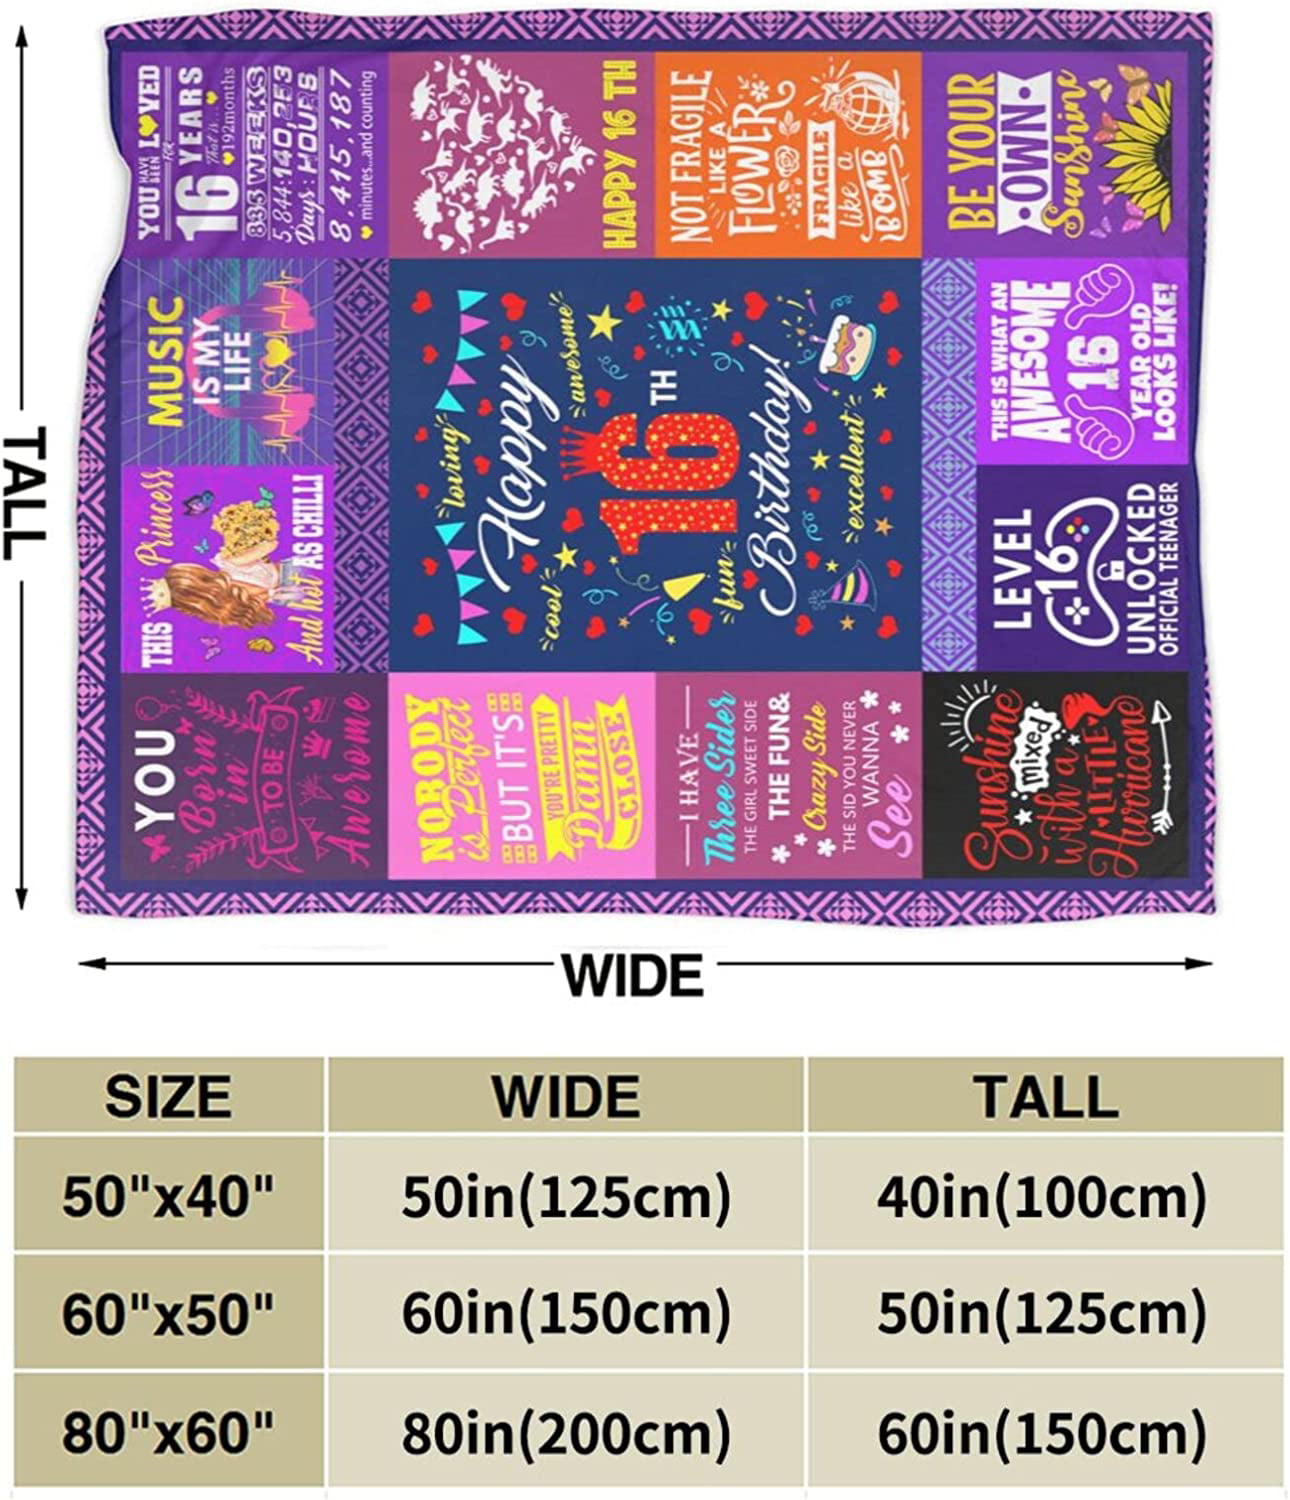 Dulkjio 13 Year Old Girl Gift Ideas Blanket Gifts for 13 Year Old Girl 13th  B